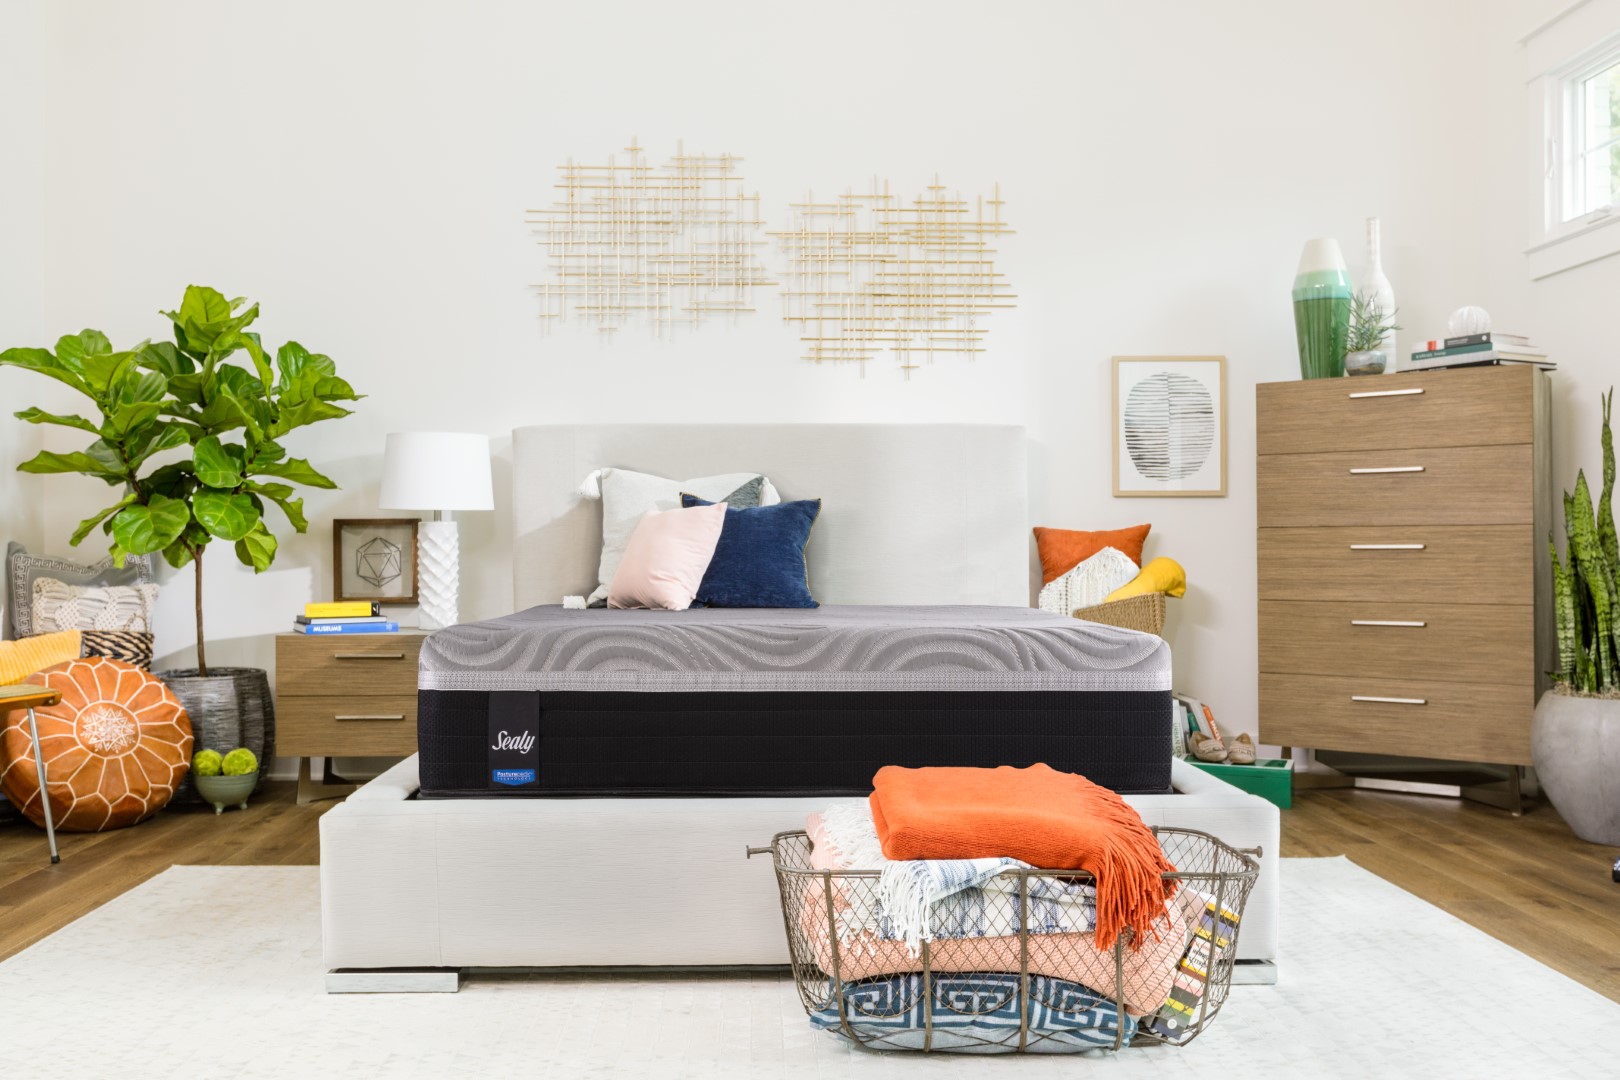 Tips on How to Pick a New Sealy Mattress